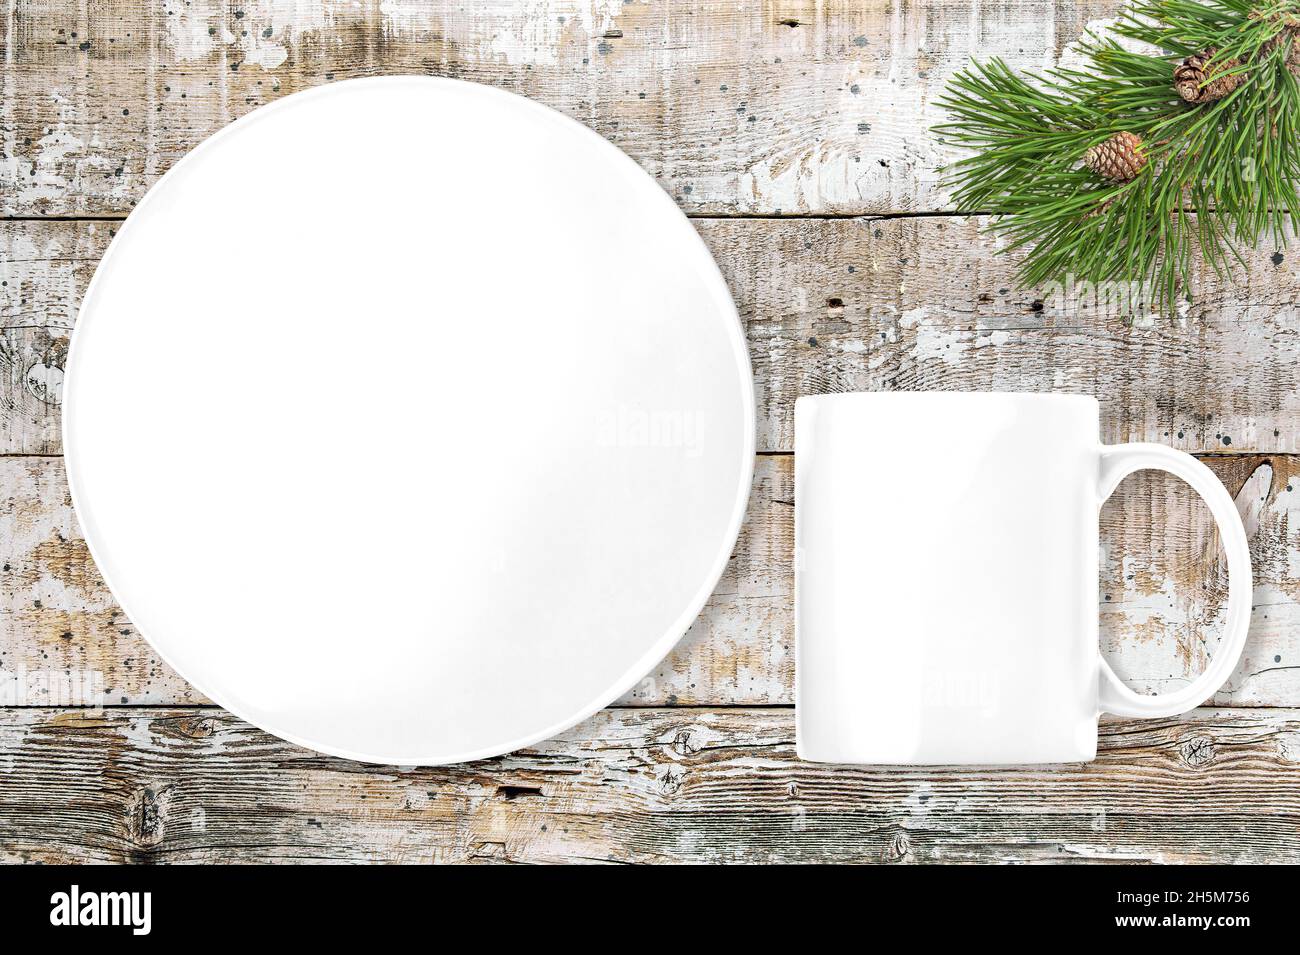 Mockup white plate tray and mug on rustic wooden background Stock Photo